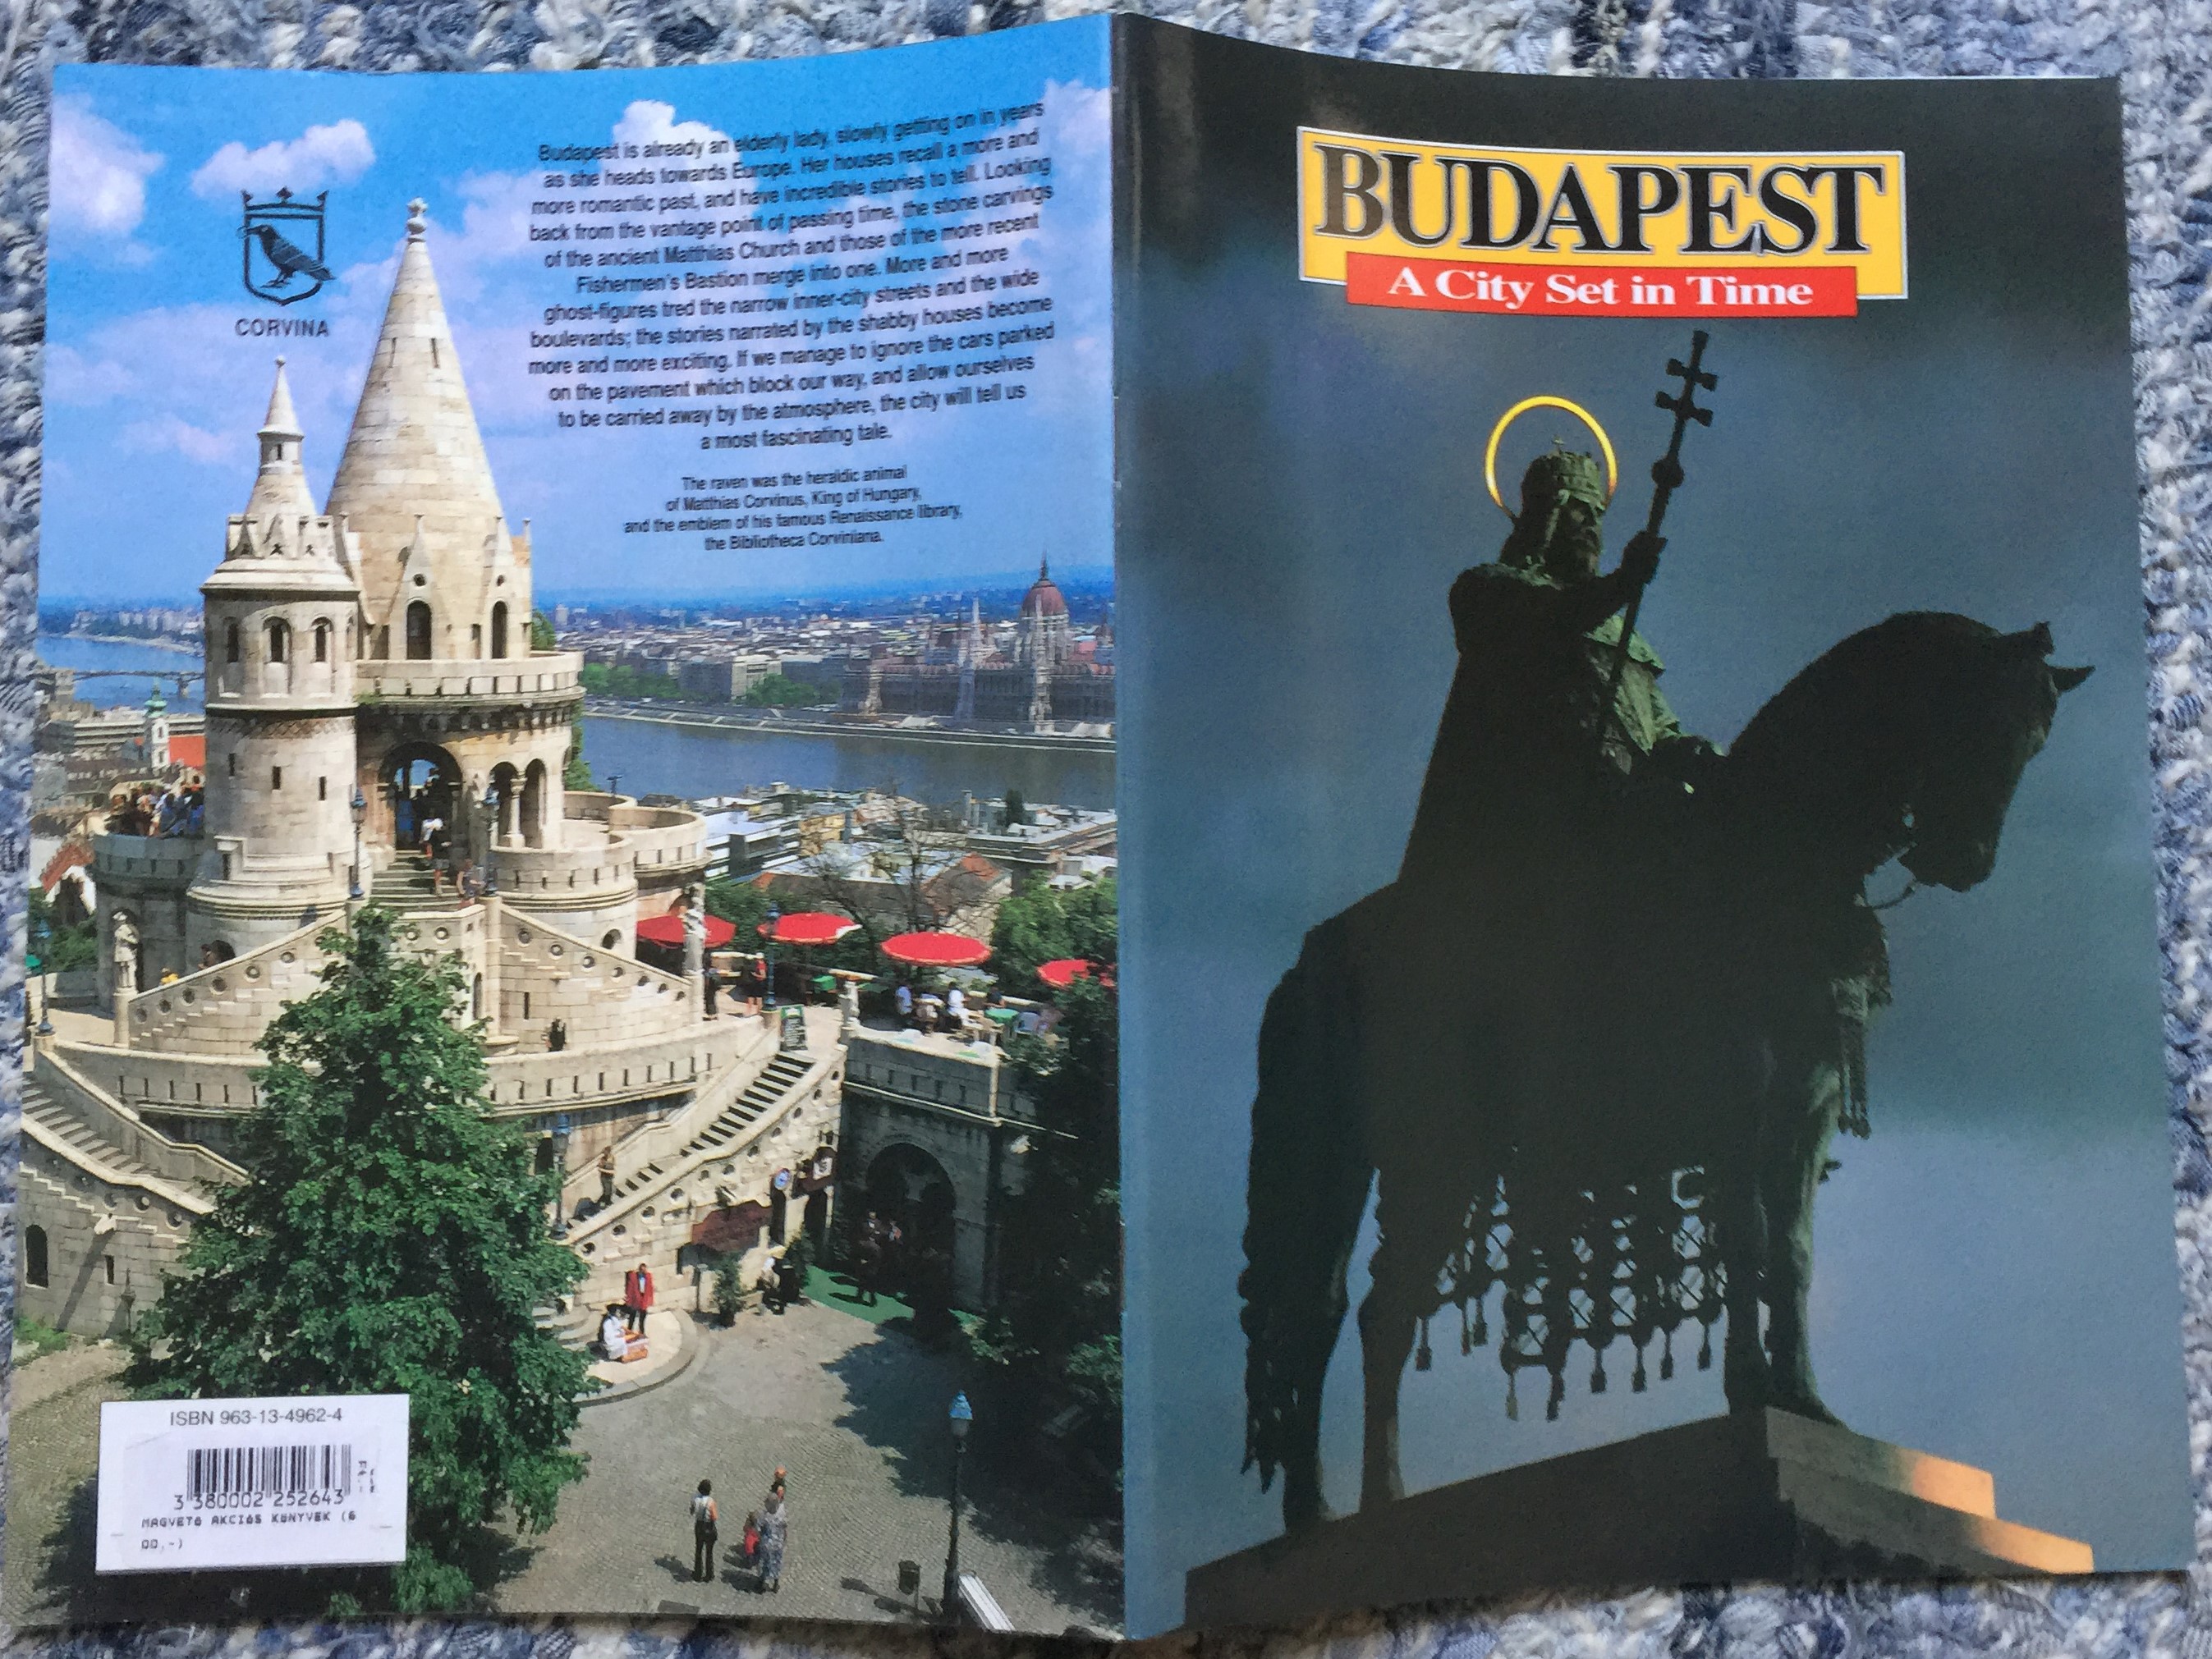 budapest-a-city-set-in-time-english-language-city-tour-booklet-of-the-hungarian-capital-11.jpg